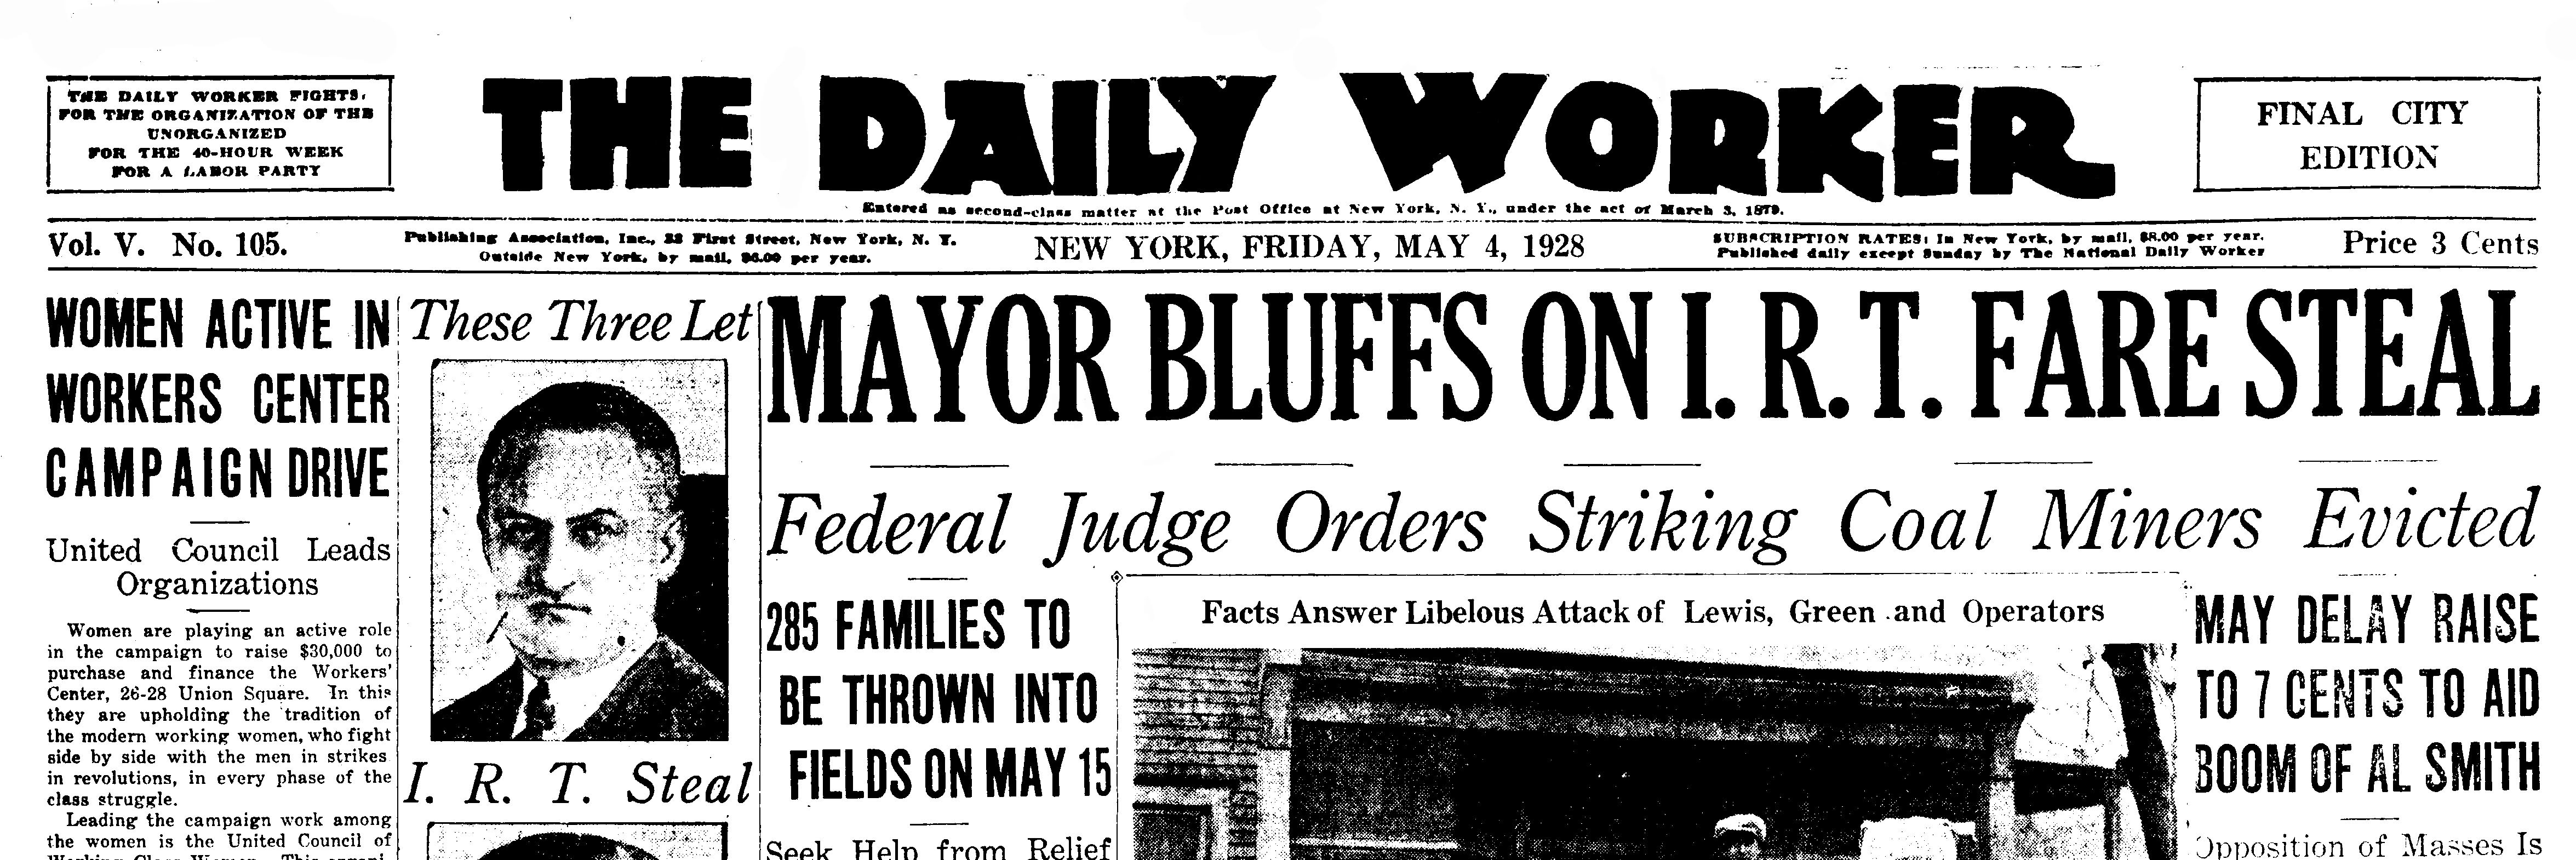 1928 Daily Worker NY Edition